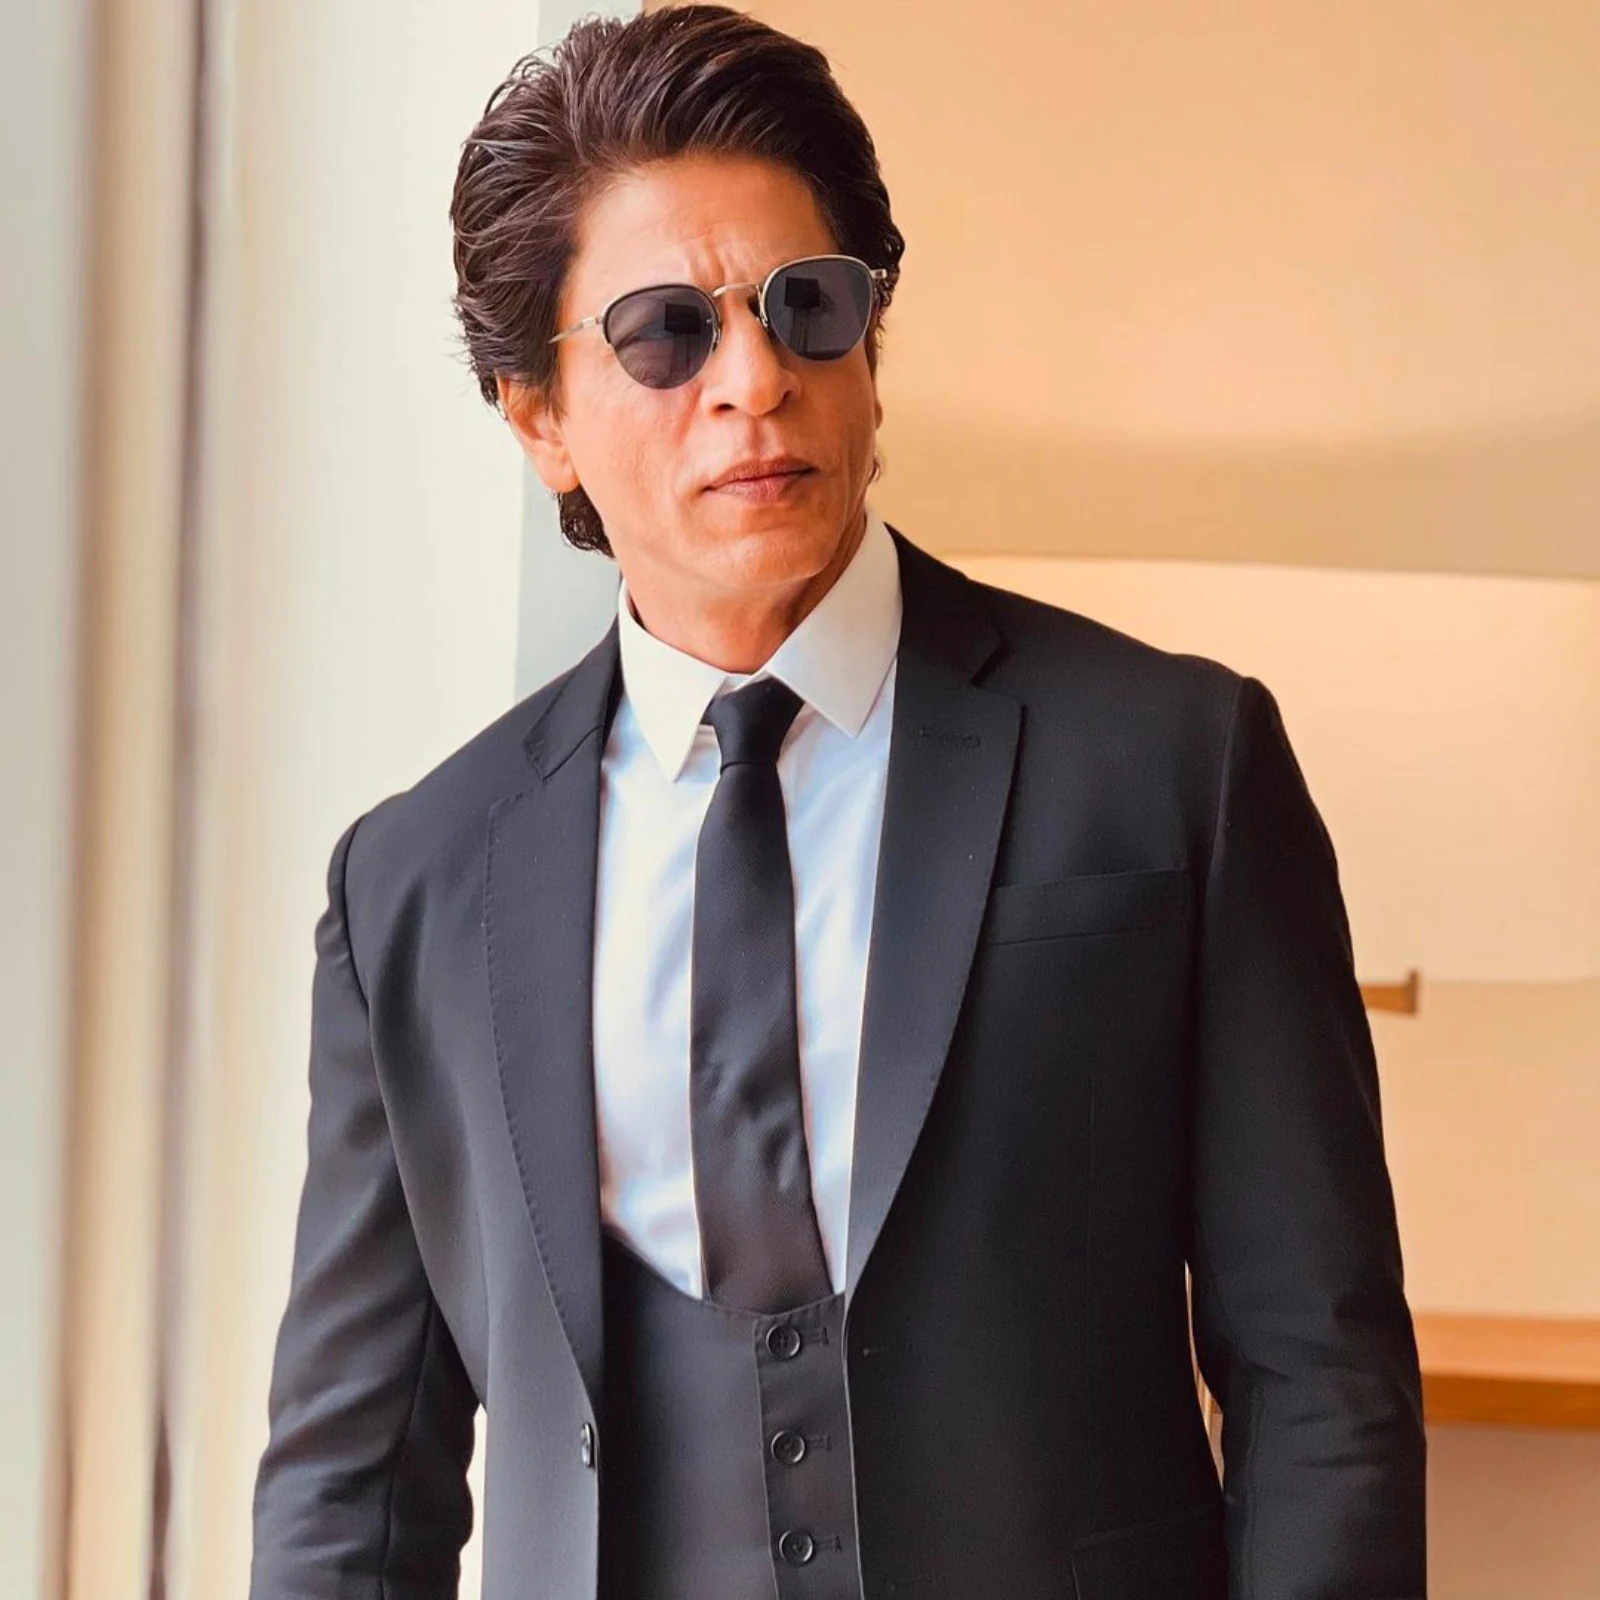 Burjeel Holdings, a leading healthcare services provider signs Shah Rukh khan as a brand ambassador 